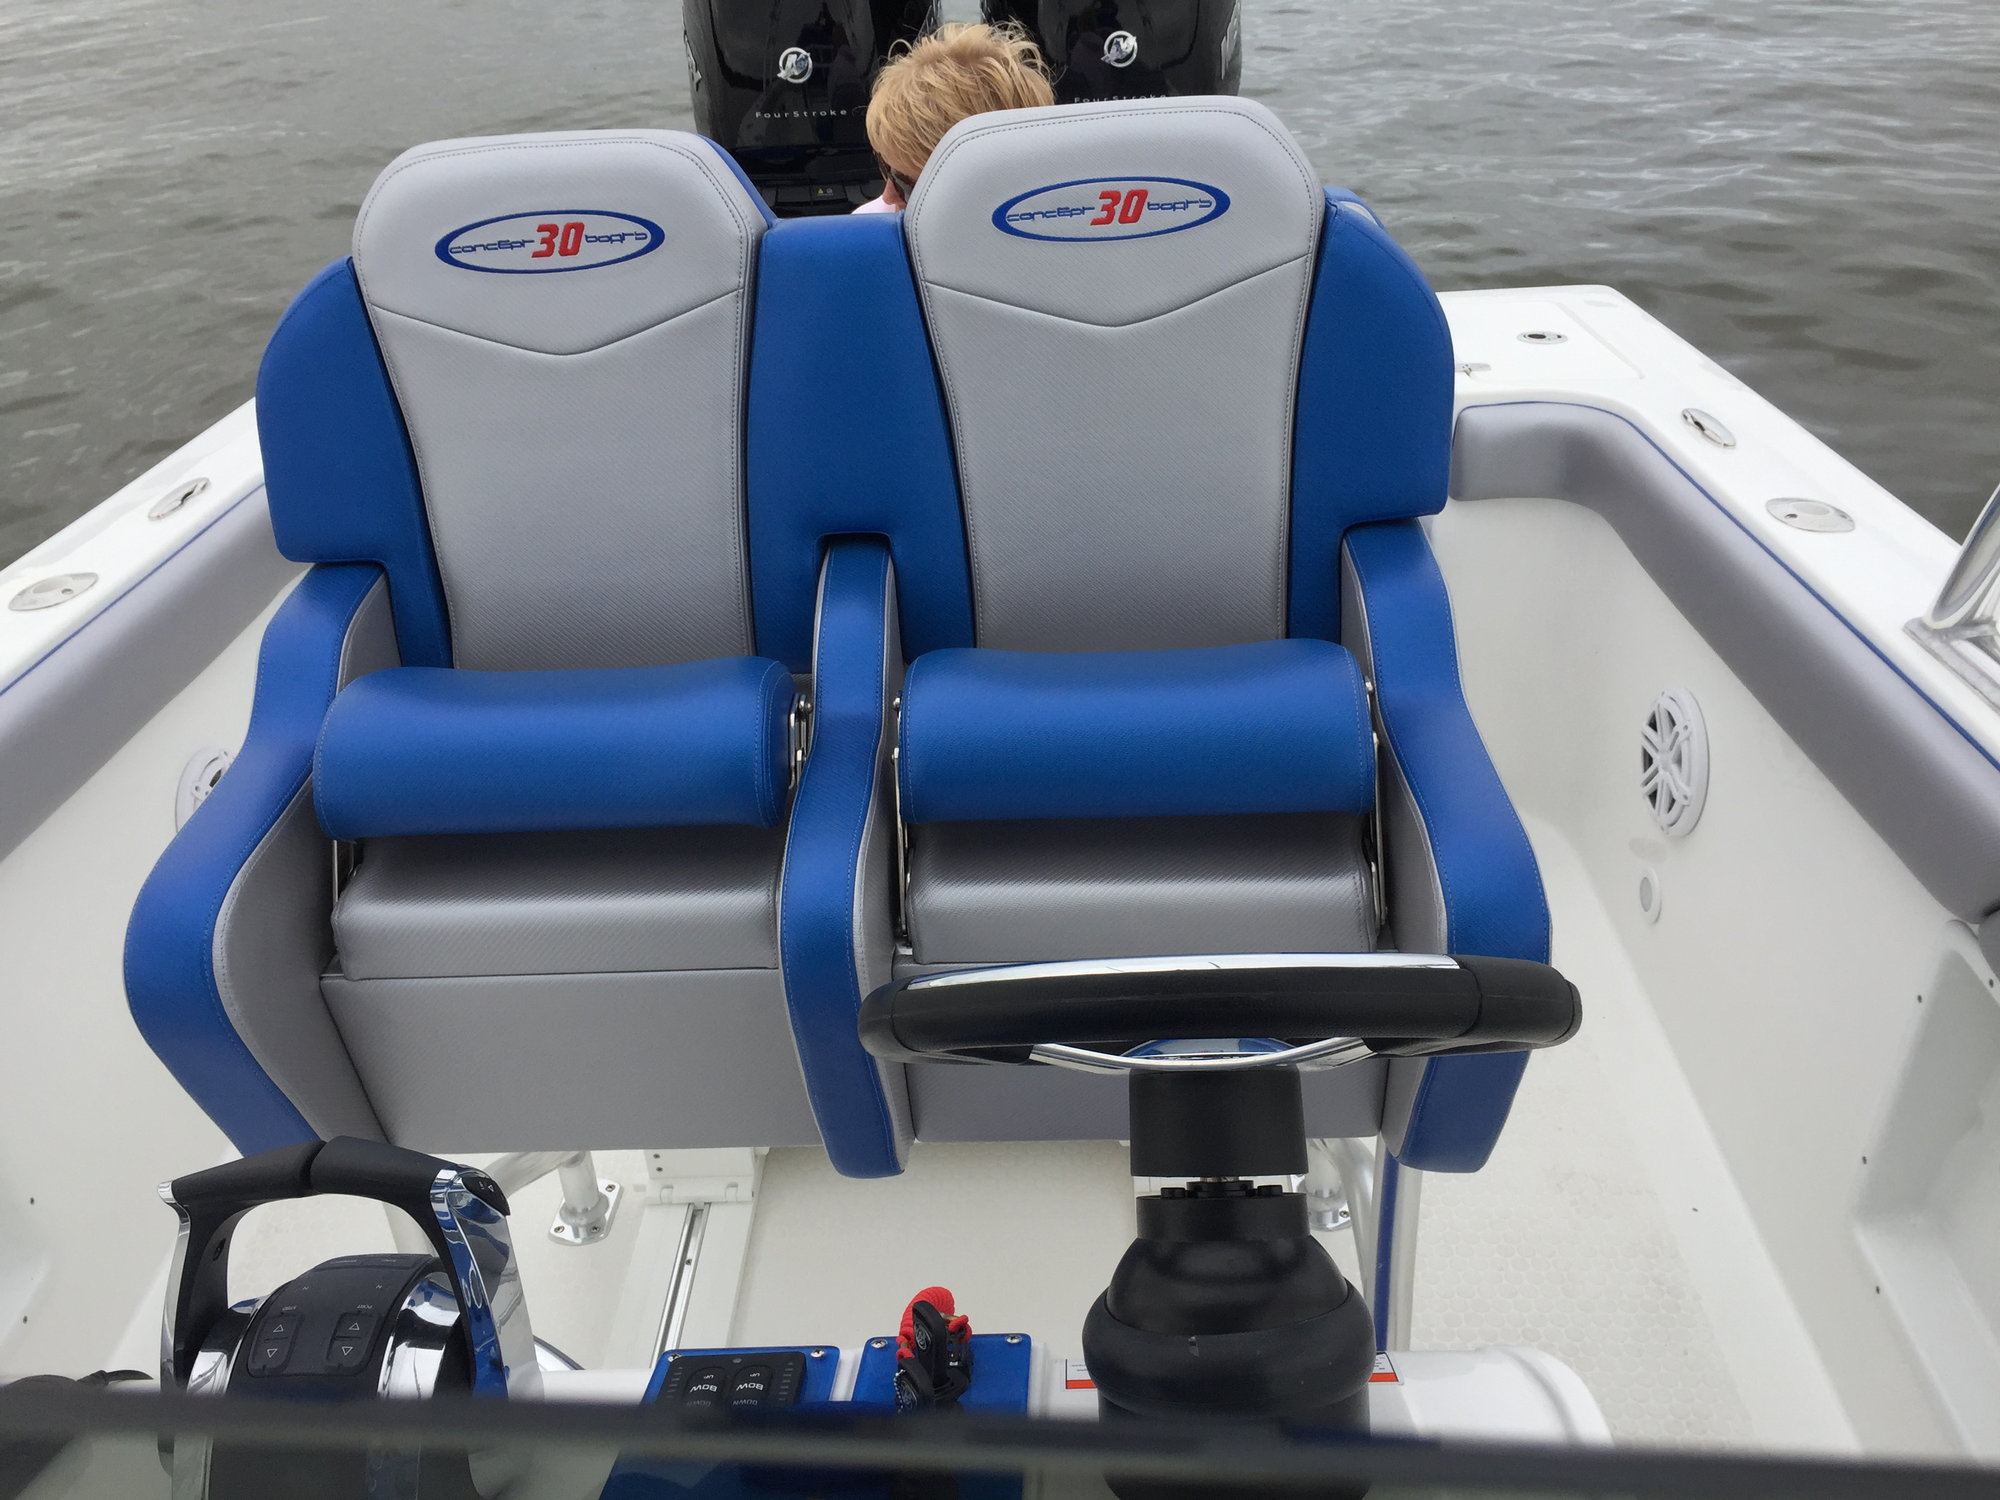 Bucket seats on center console - The Hull Truth - Boating and